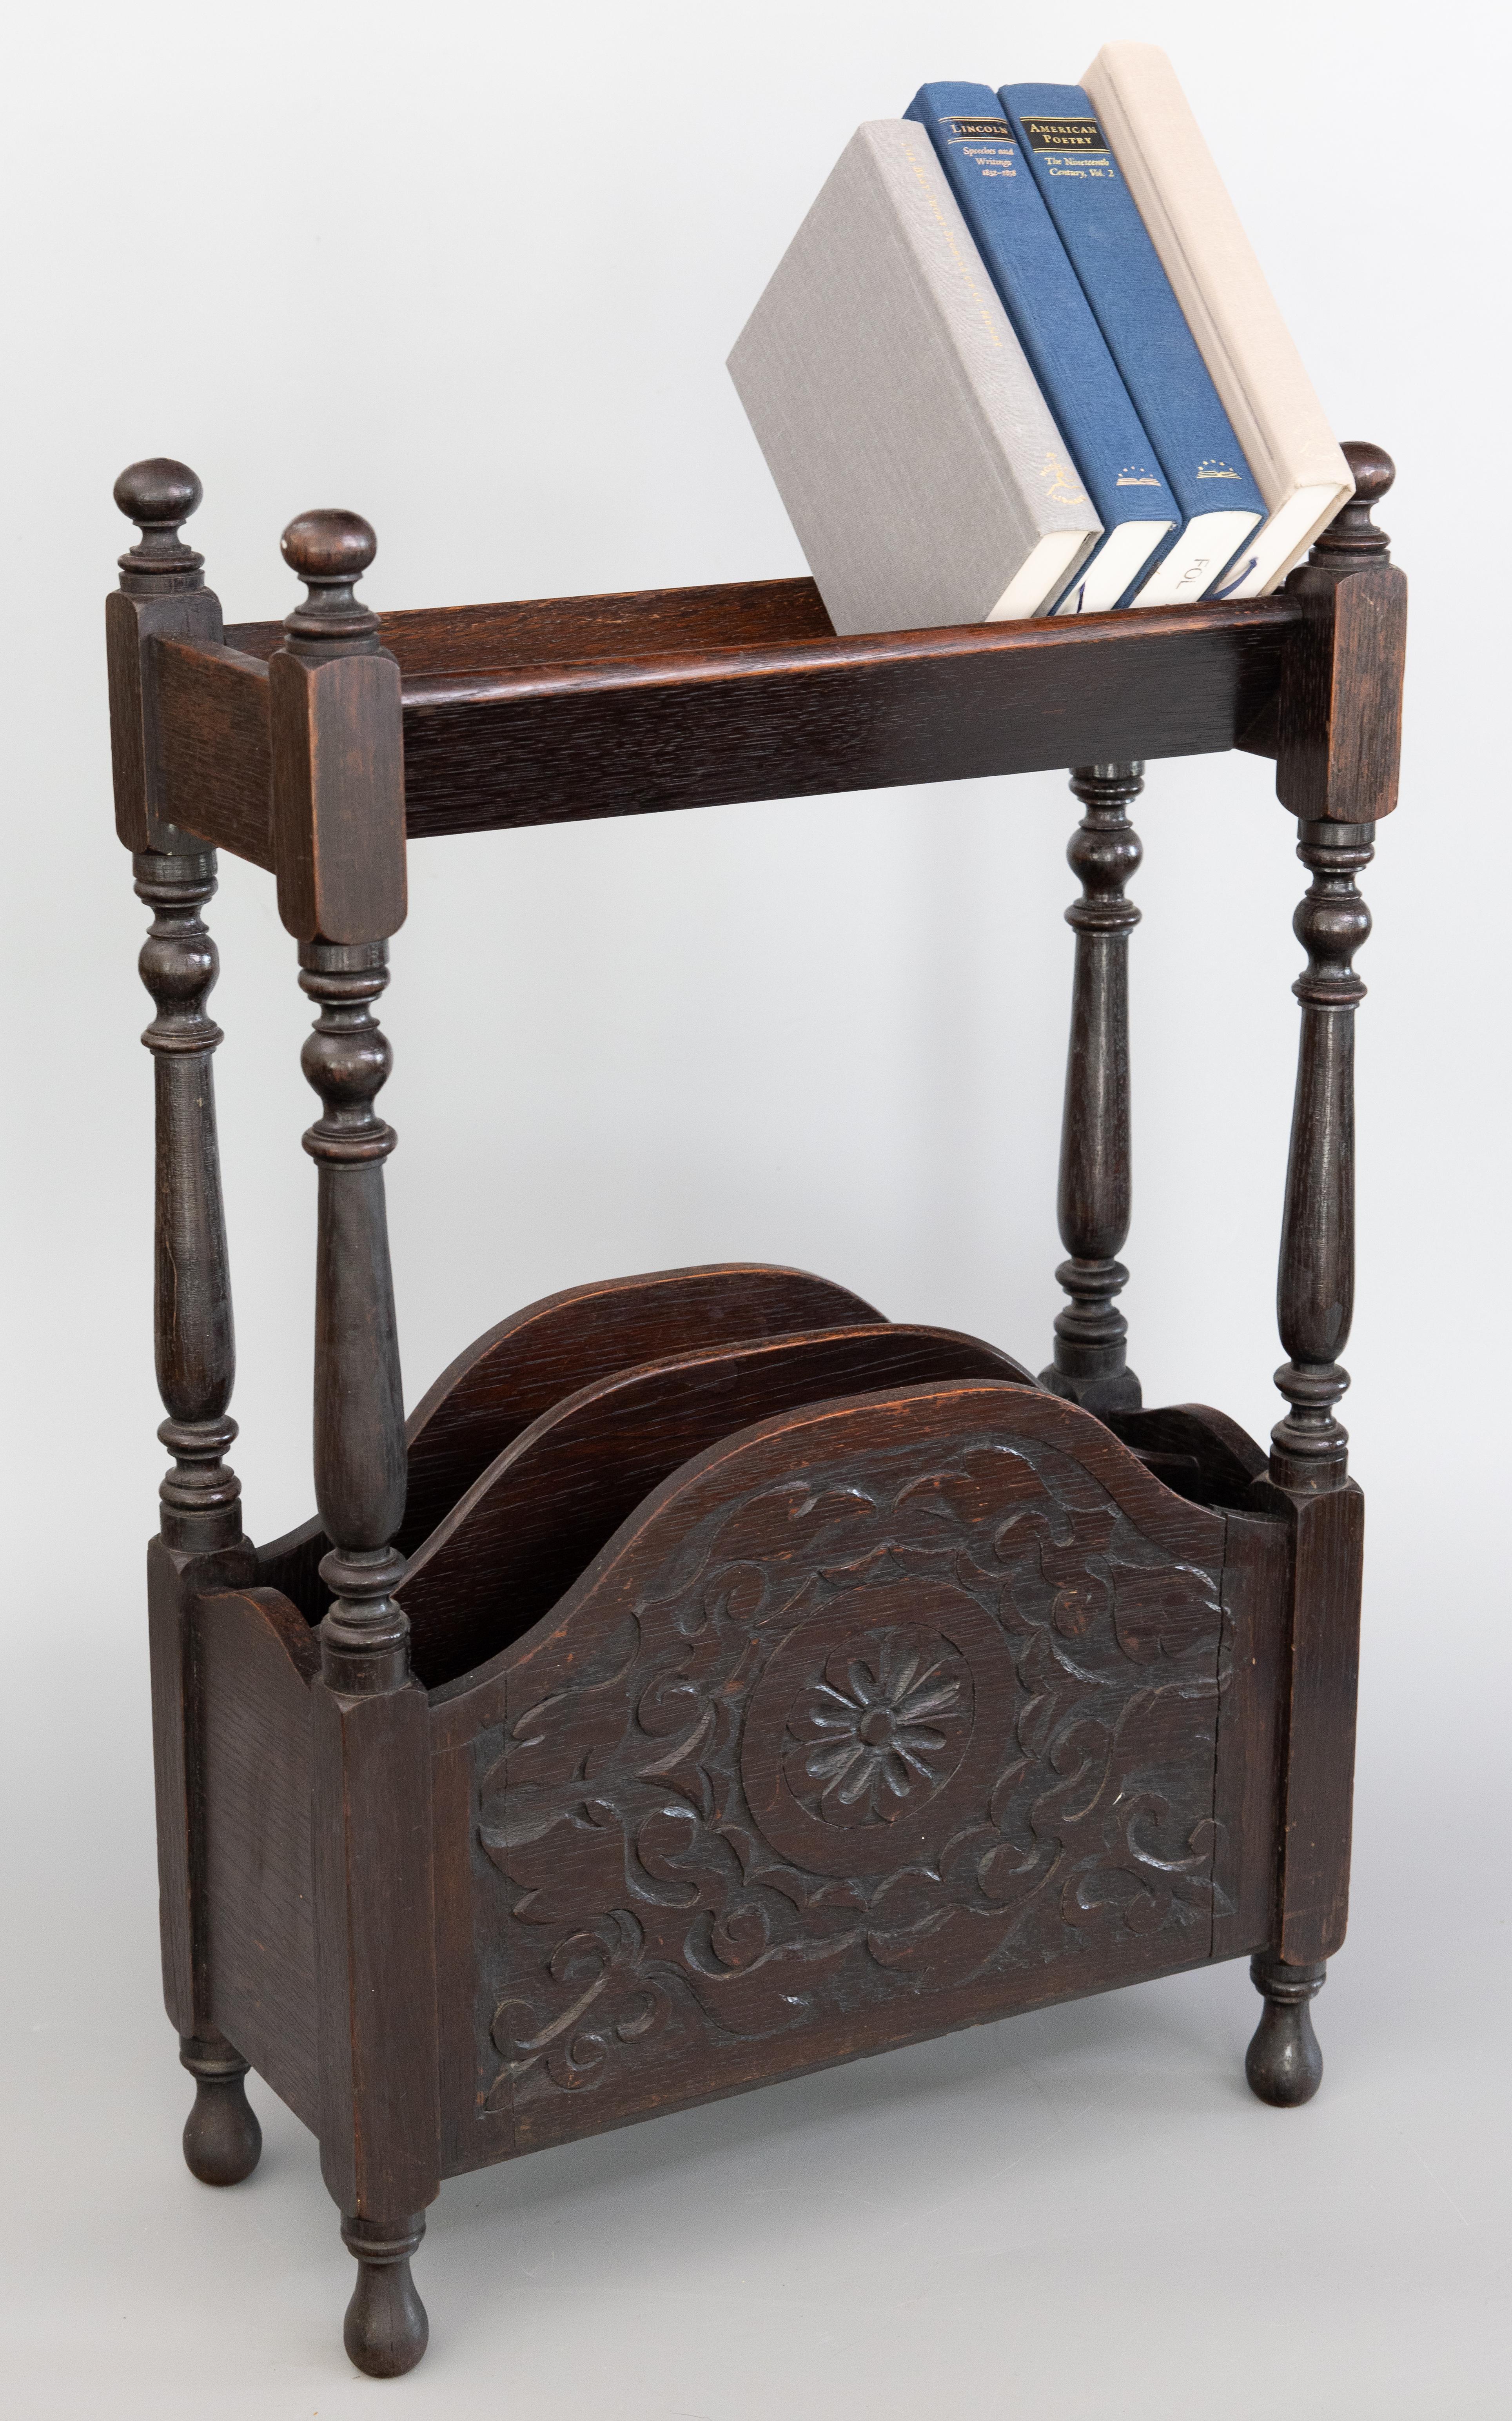 Edwardian Antique English Carved Oak Library Book Trough and Magazine Rack Stand, c. 1910 For Sale